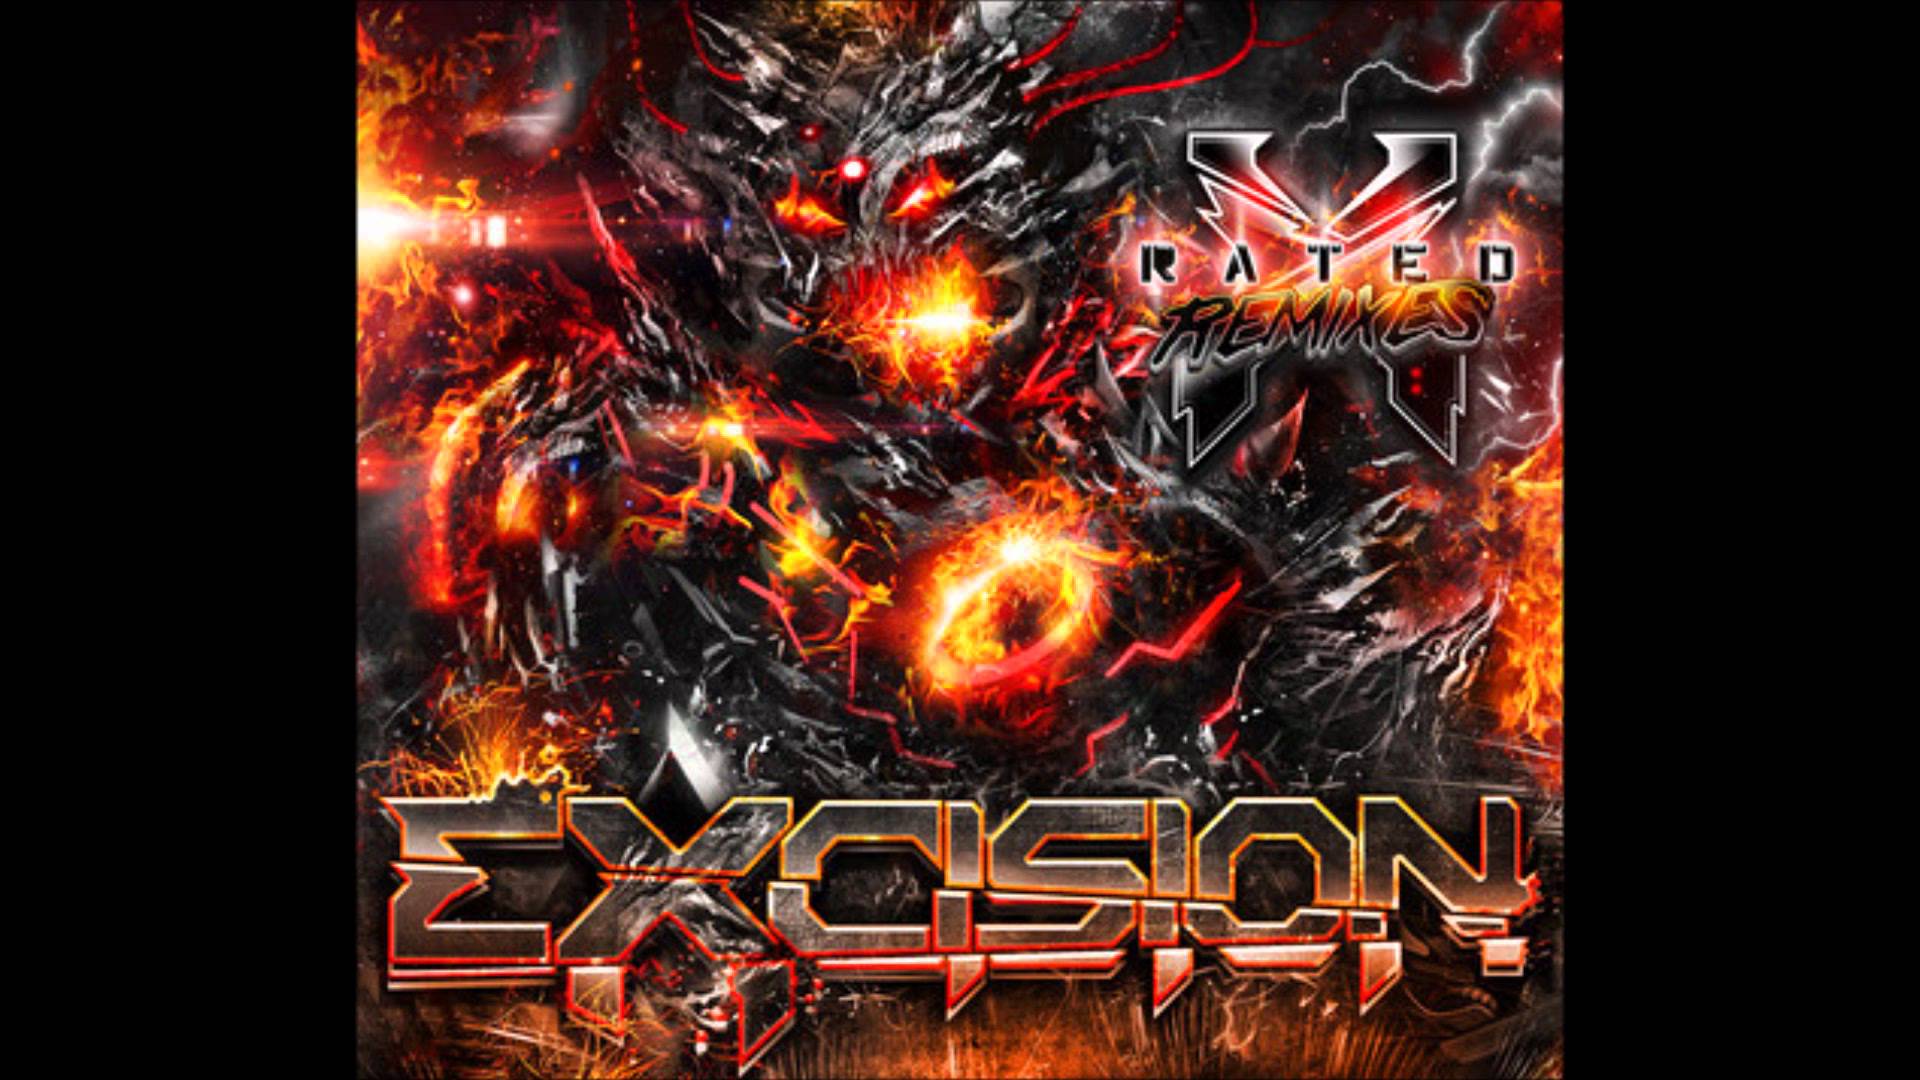 Image For Excision Wallpaper